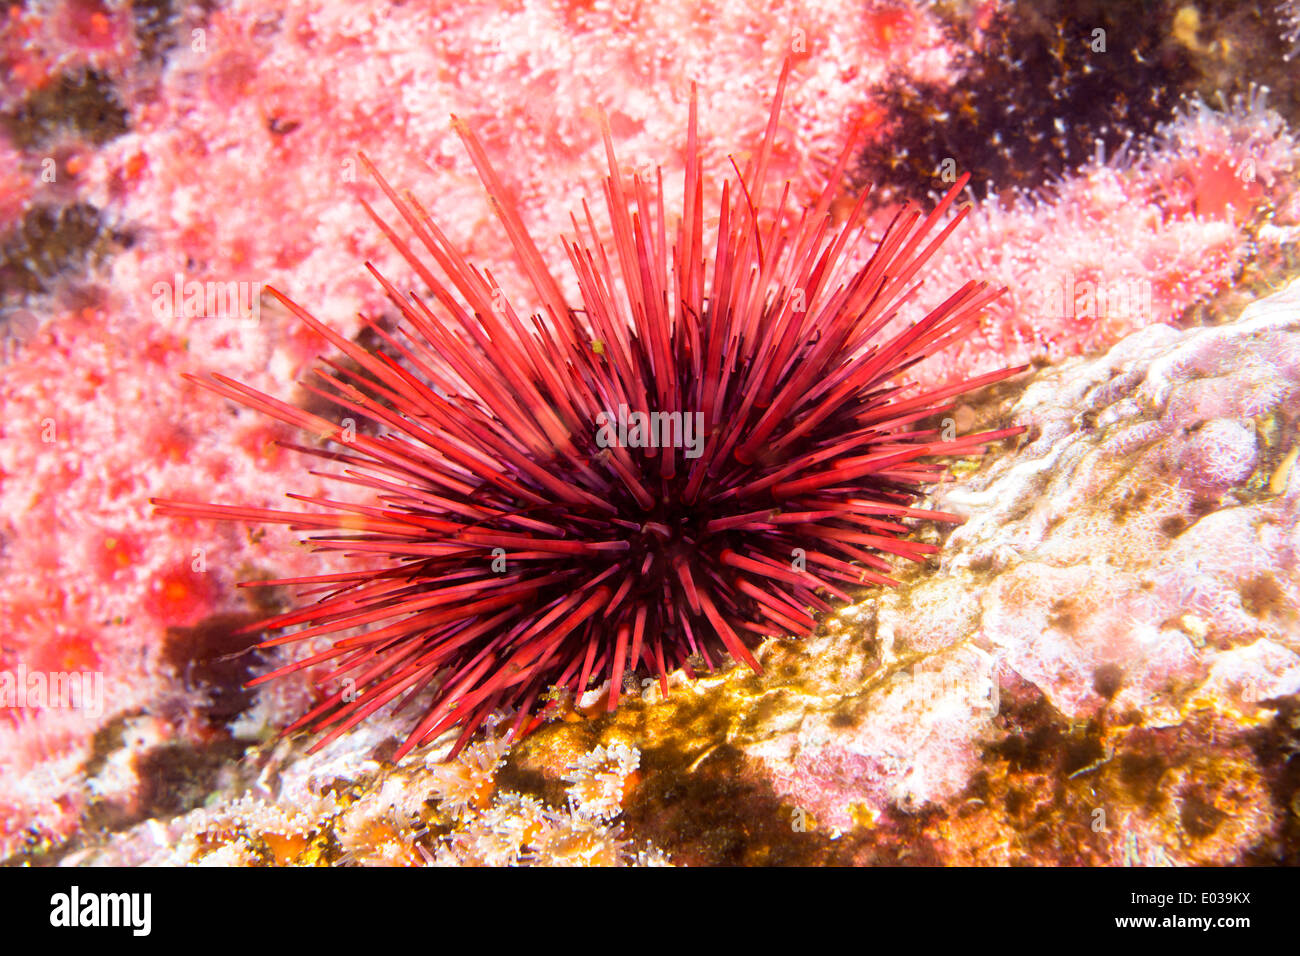 A lone red sea urchin amongst a colony of small club tipped anemones in the cold waters of California. Stock Photo